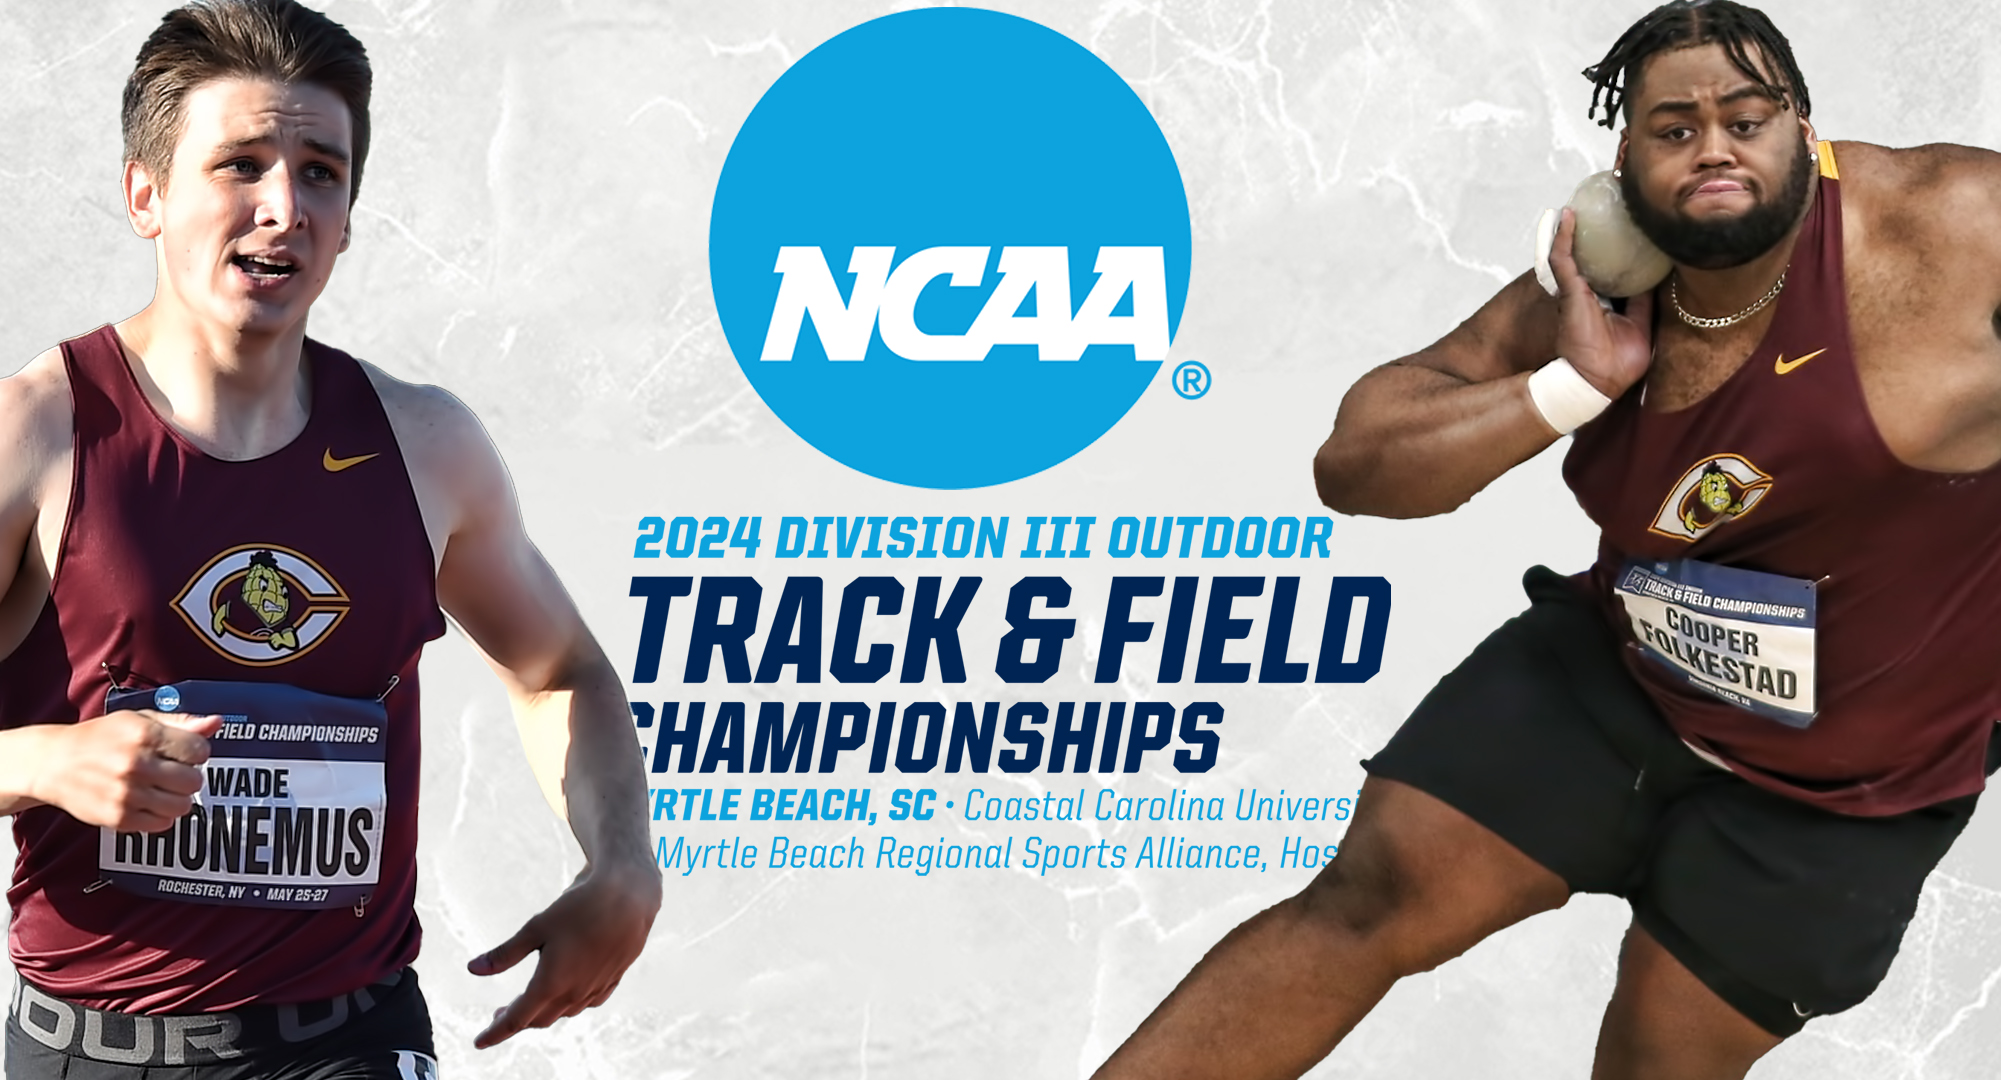 Seniors Cooper Folkestad and Wade Rhonemus will compete at the NCAA Outdoor Championship Meet in Myrtle Beach, S.C.